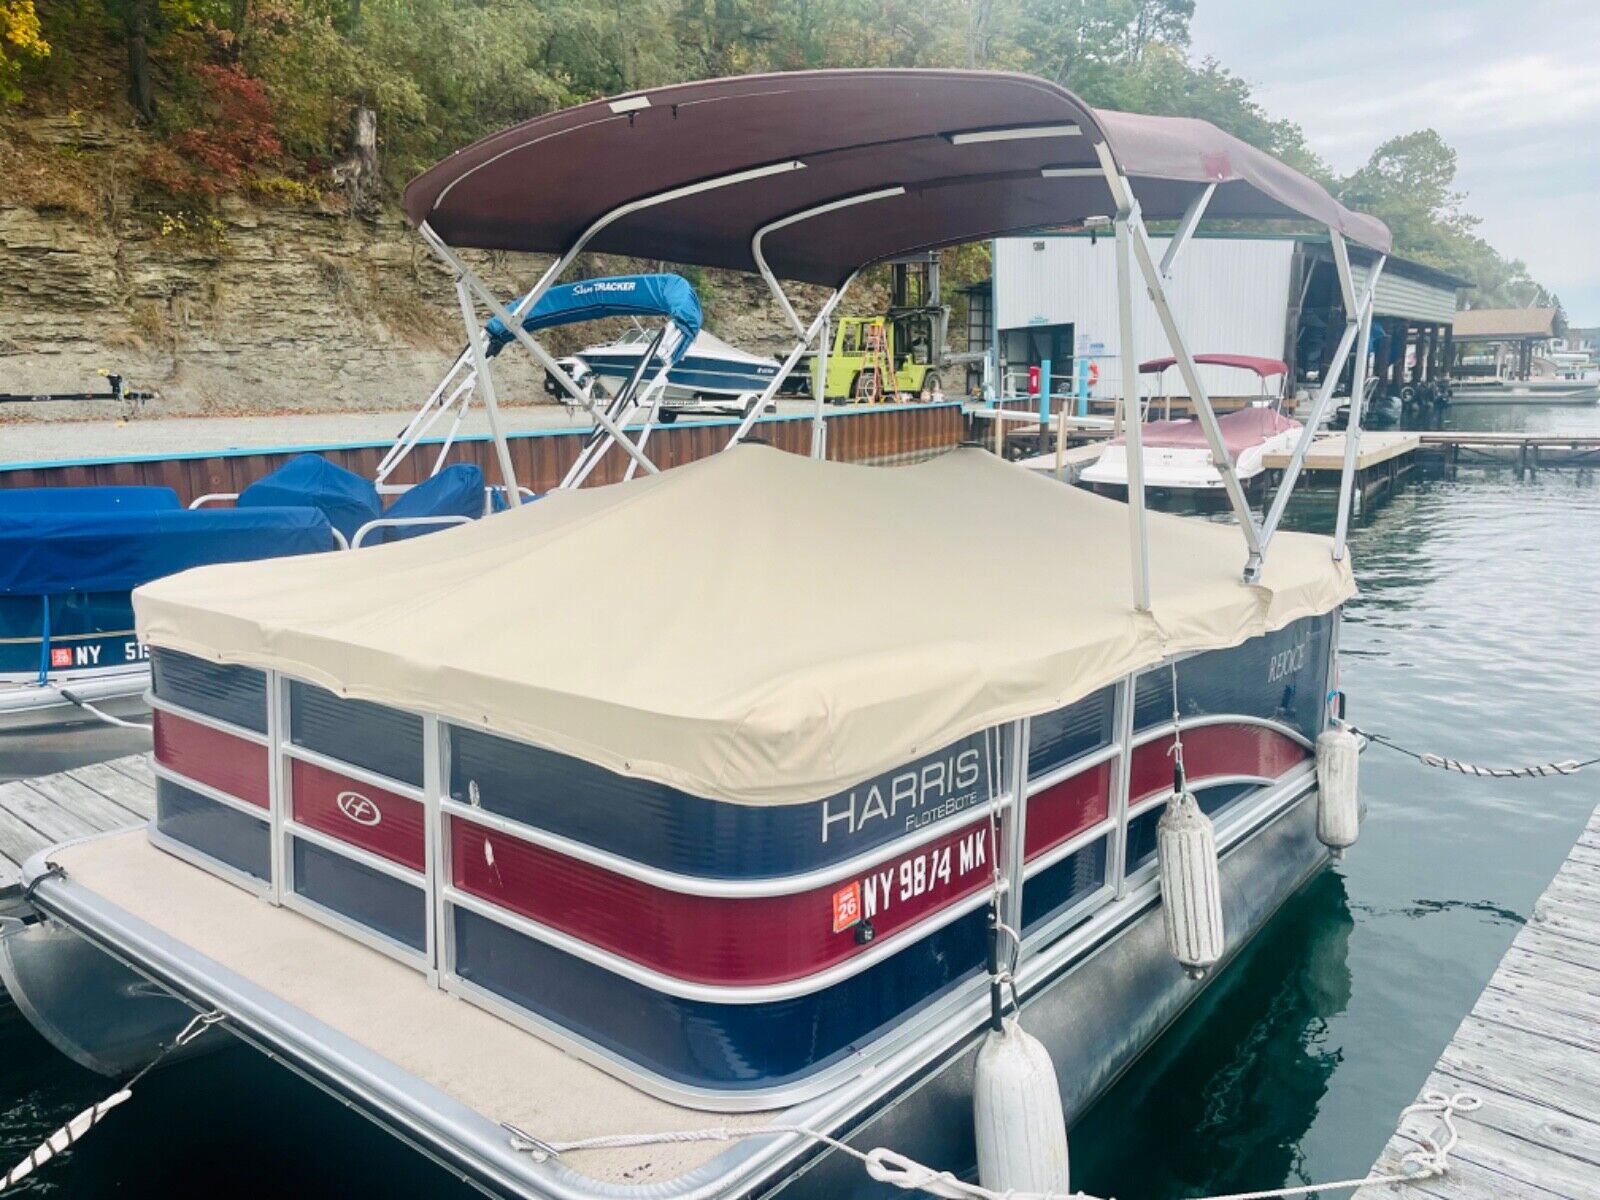 16 Ft. Harris FloteBote With Trailer For Sale.